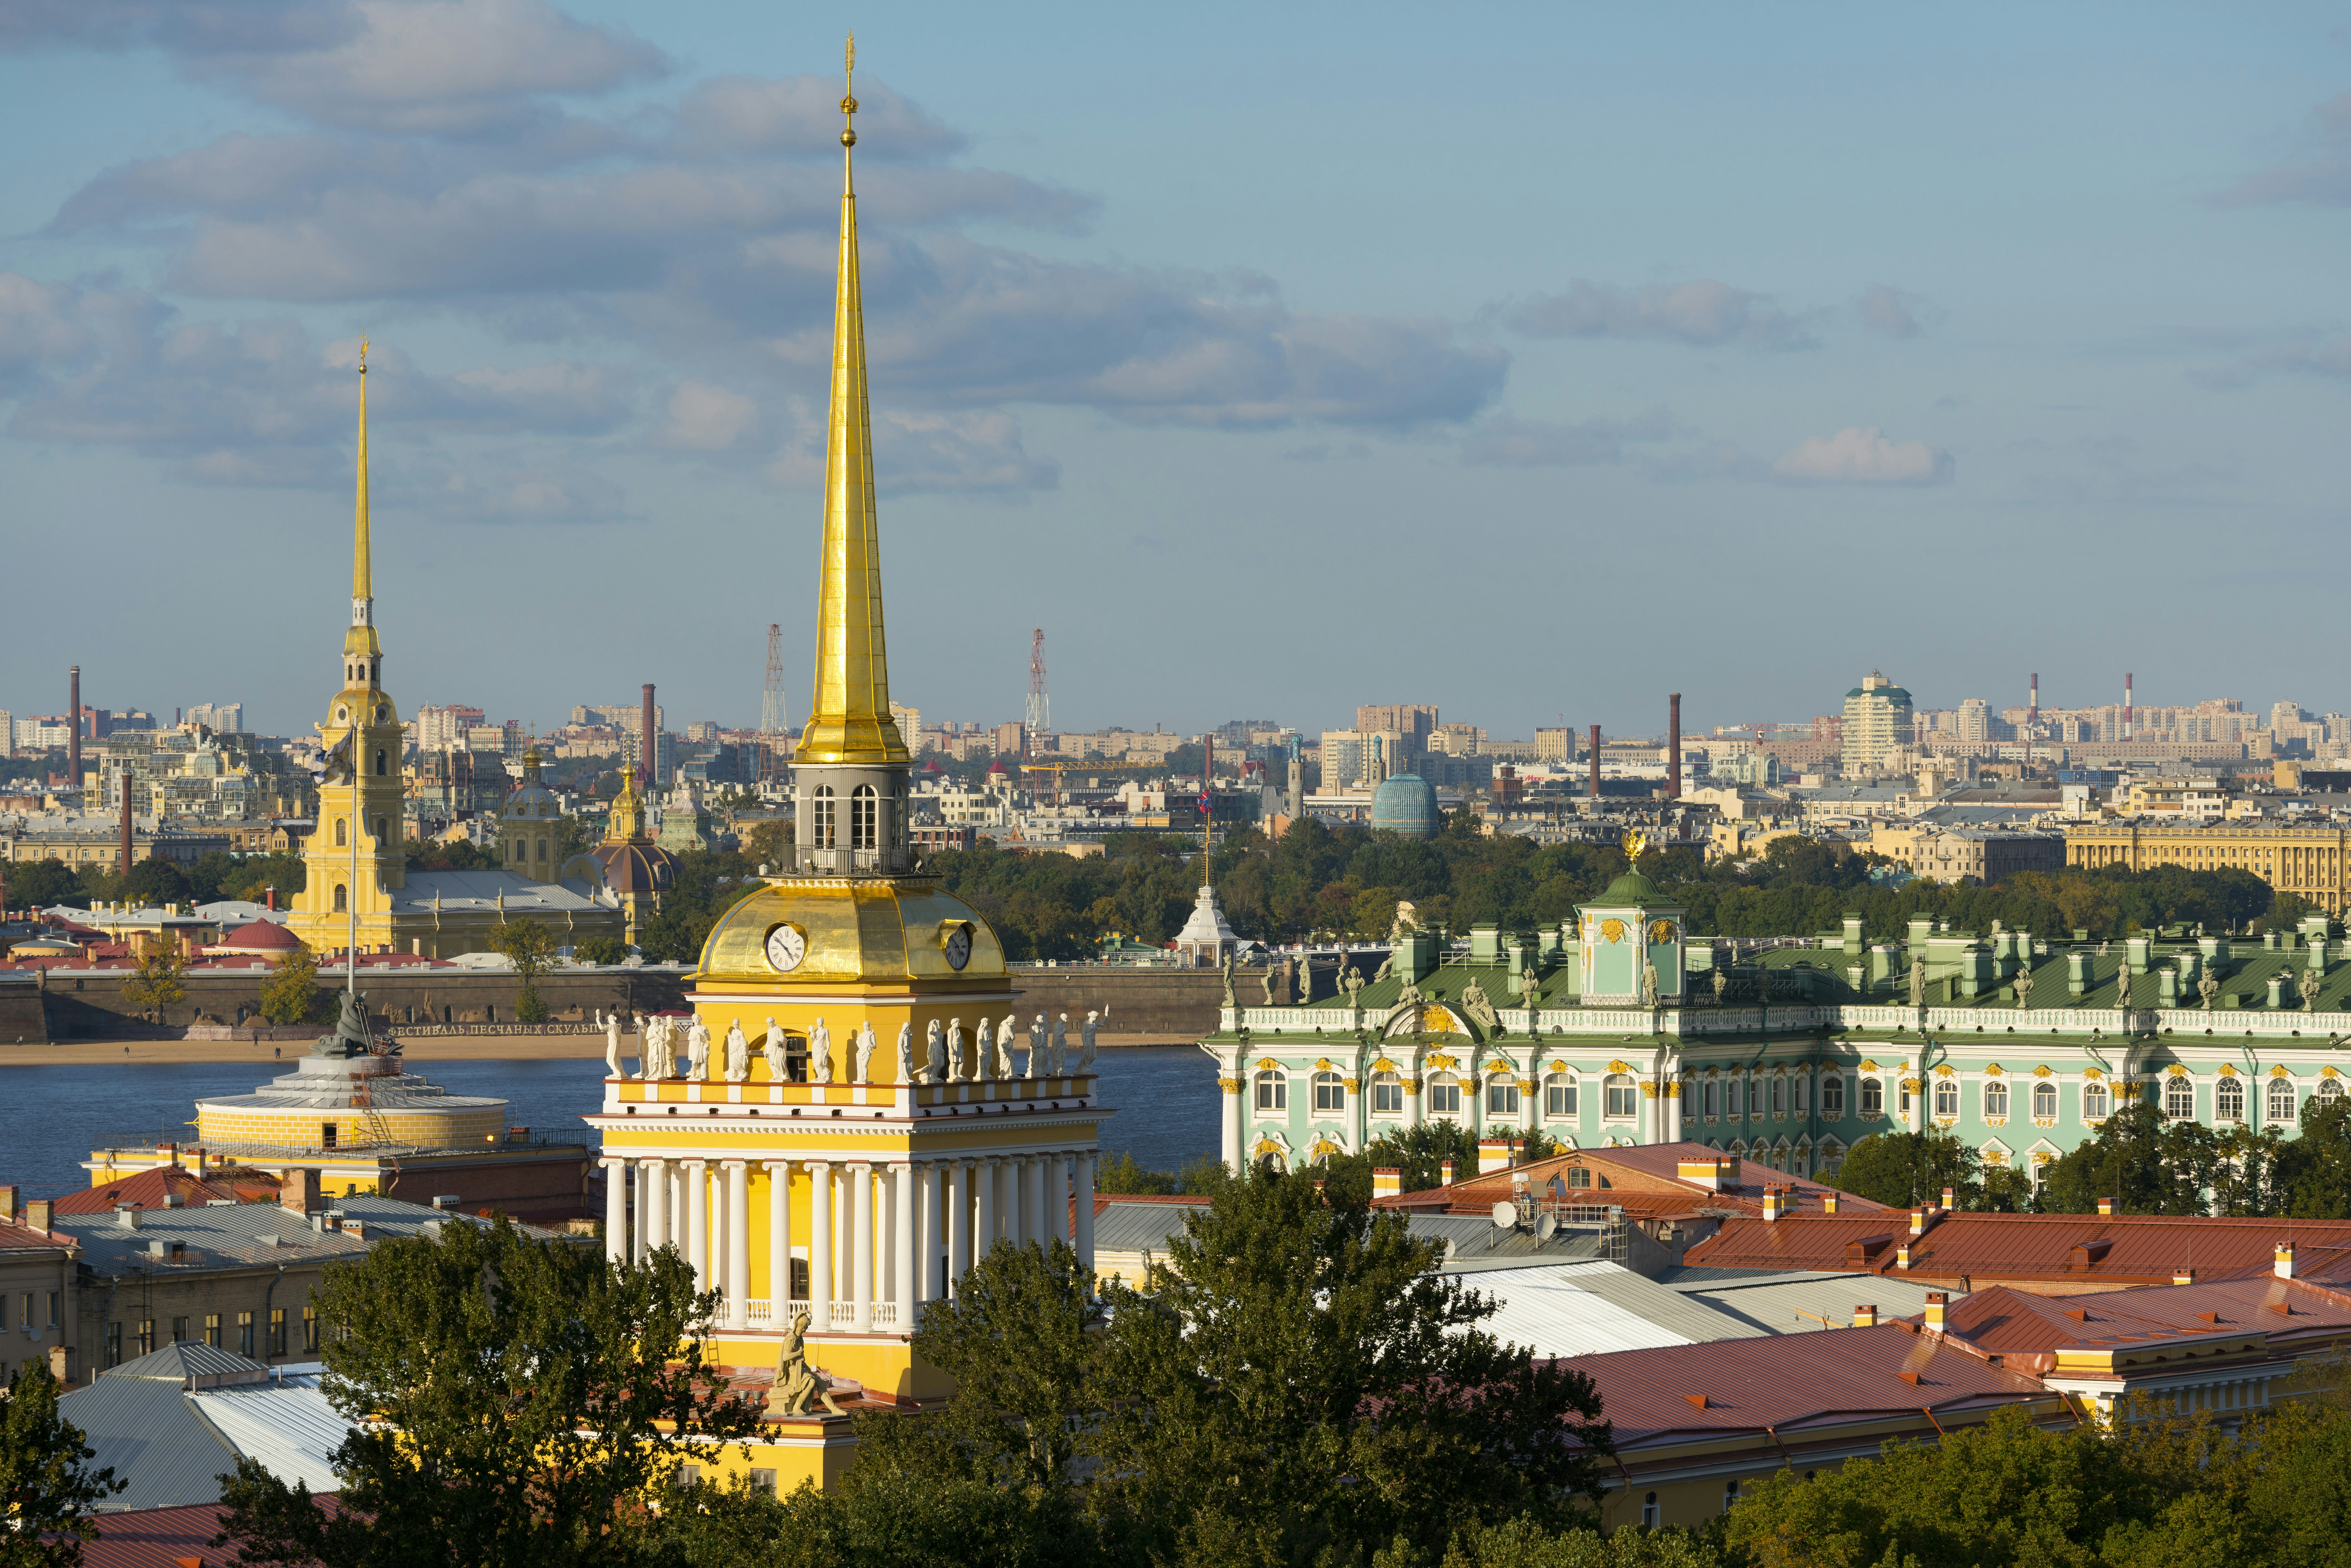 An aerial view of St Petersburg's landmark architecture, with golden spires and ornate facades visible beneath a blue sky